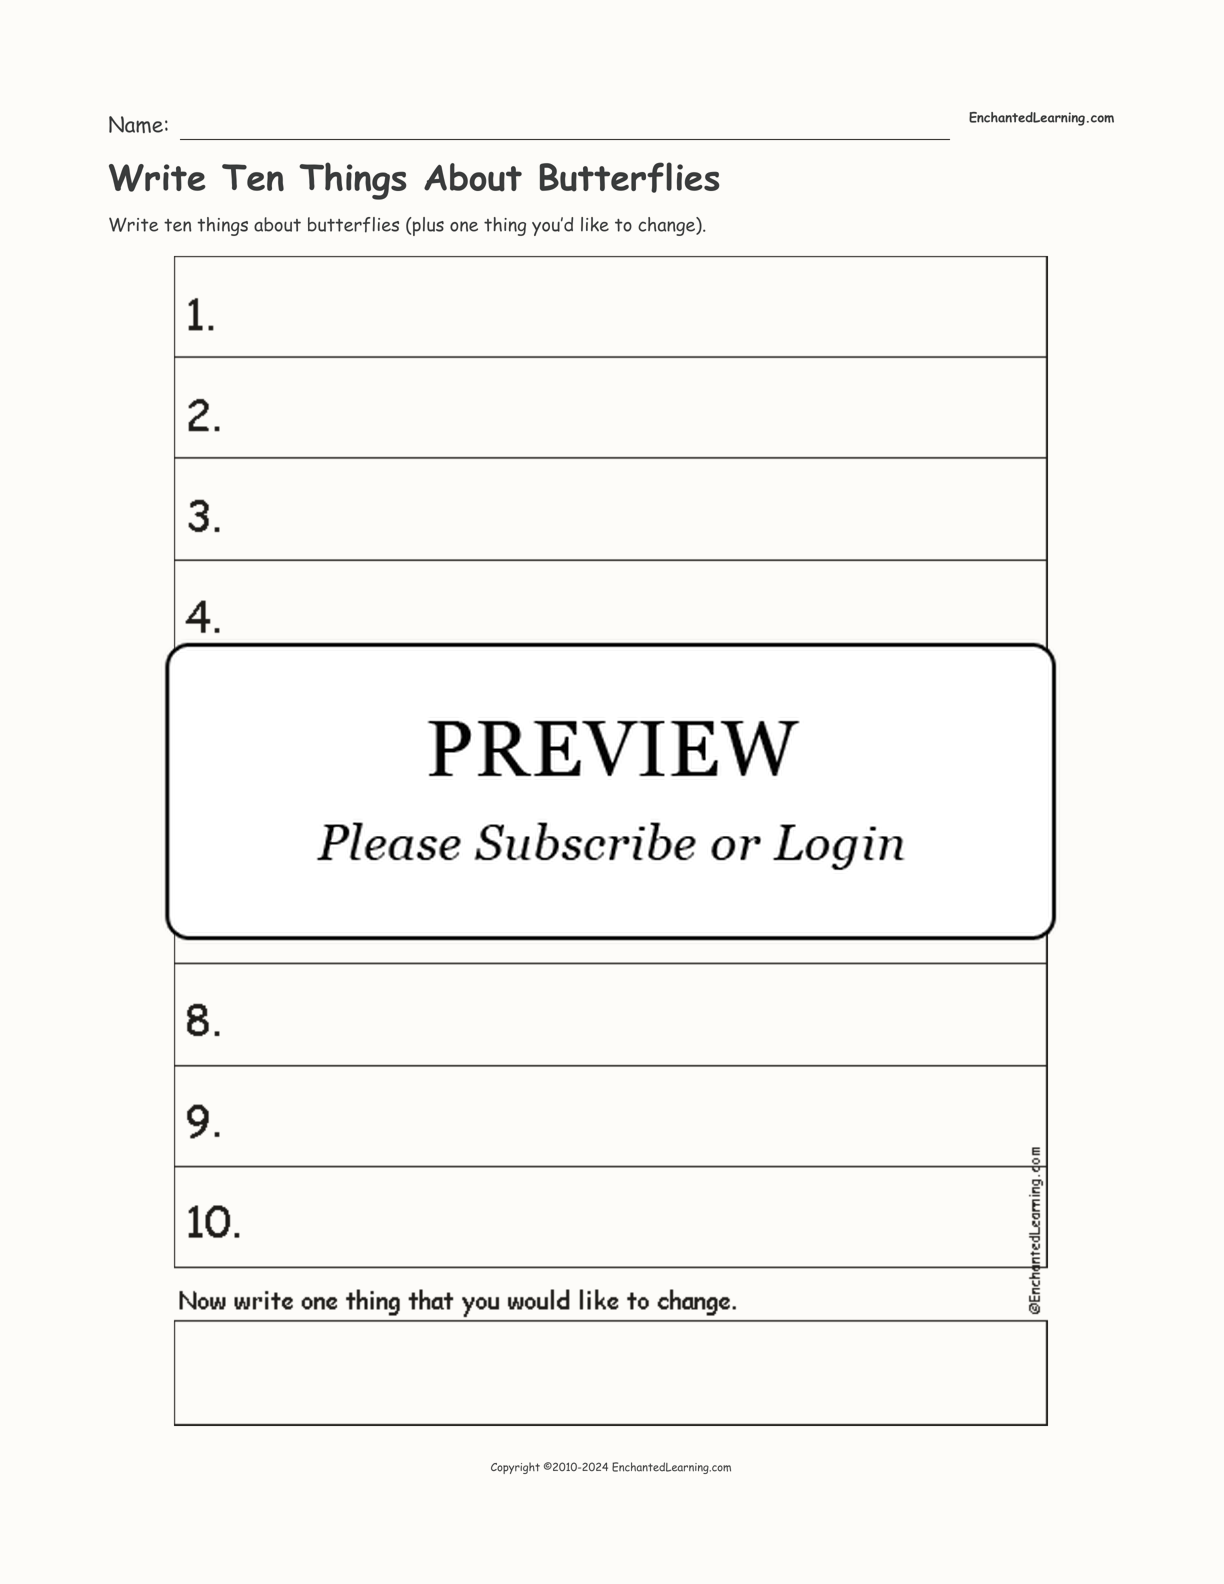 Write Ten Things About Butterflies interactive worksheet page 1